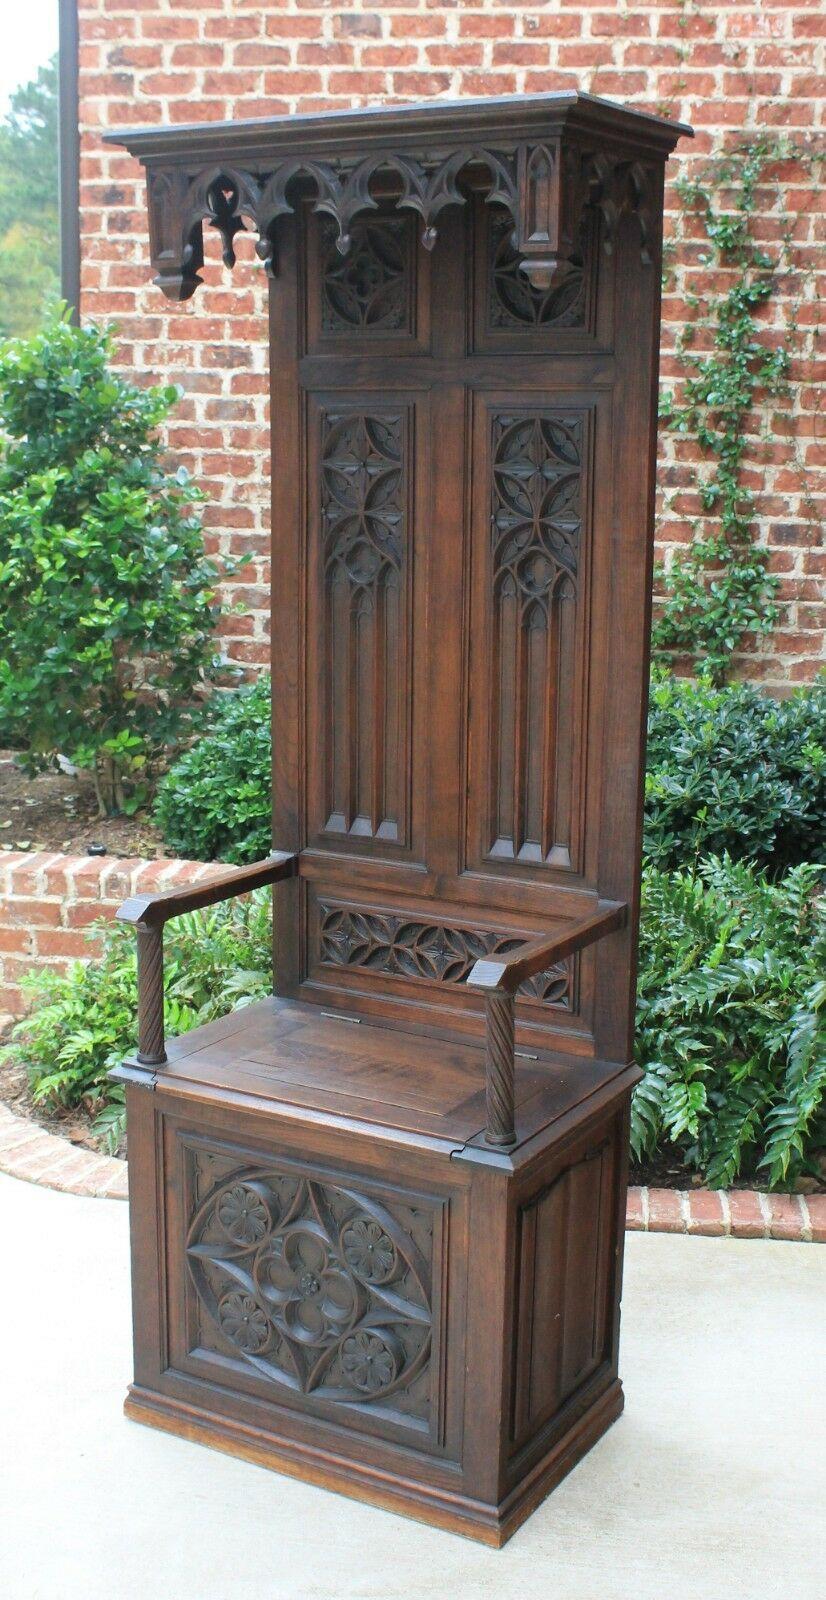 Antique French Carved Oak Hall Seat Monk's Bench Throne Chair Canopy Tall 19th C 3